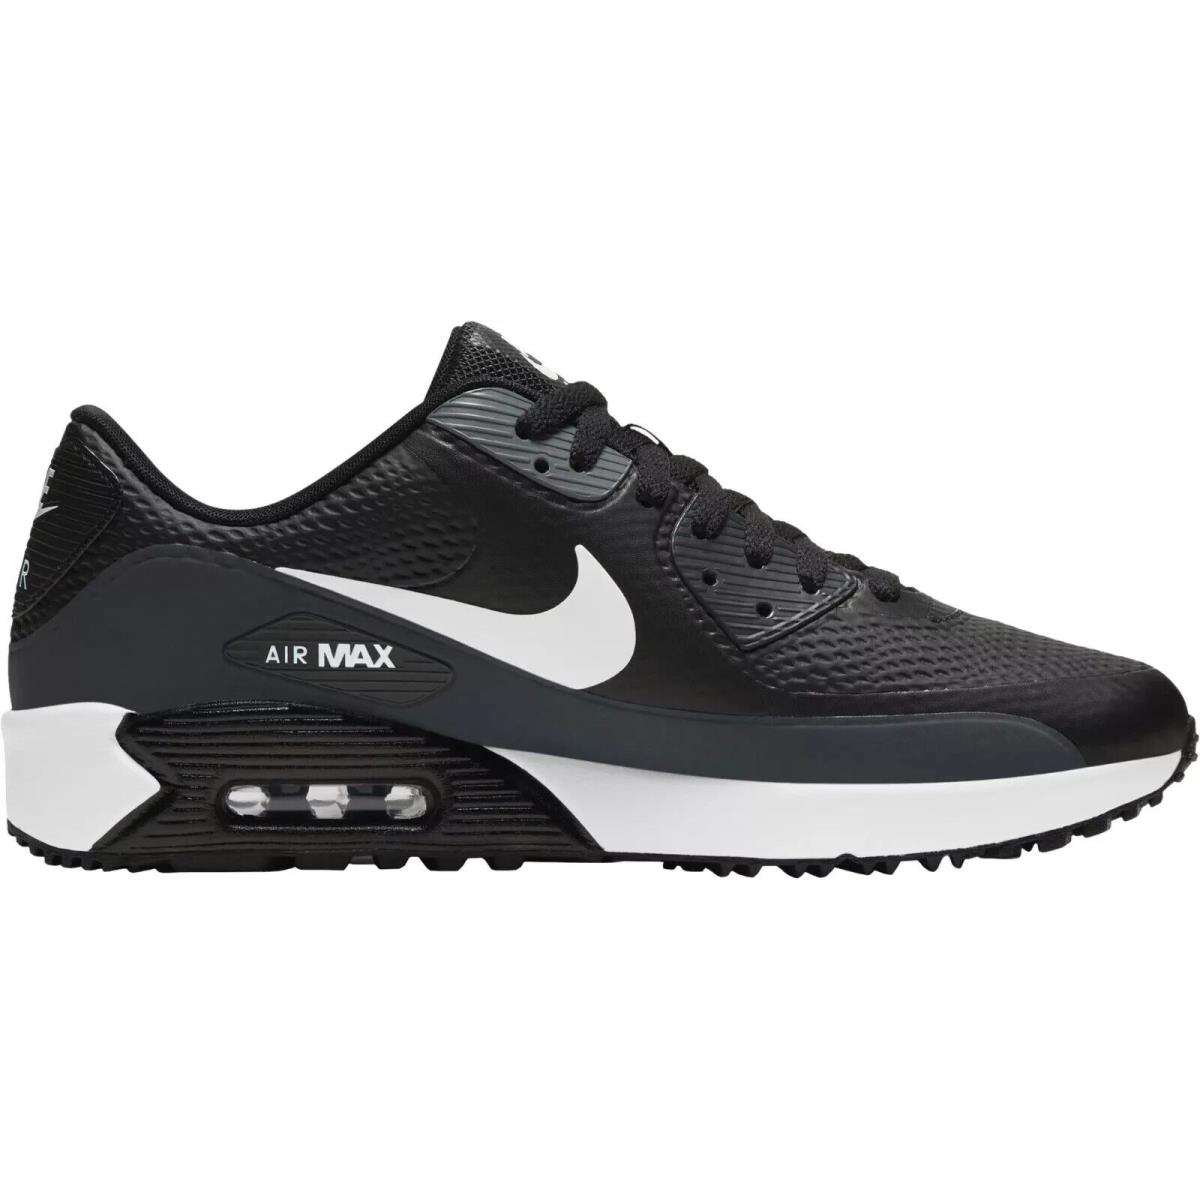 Nike Air Max 90 G Men`s Golf Shoes All Colors US Sizes 7-14 Black/Anthracite/Cool Grey/White